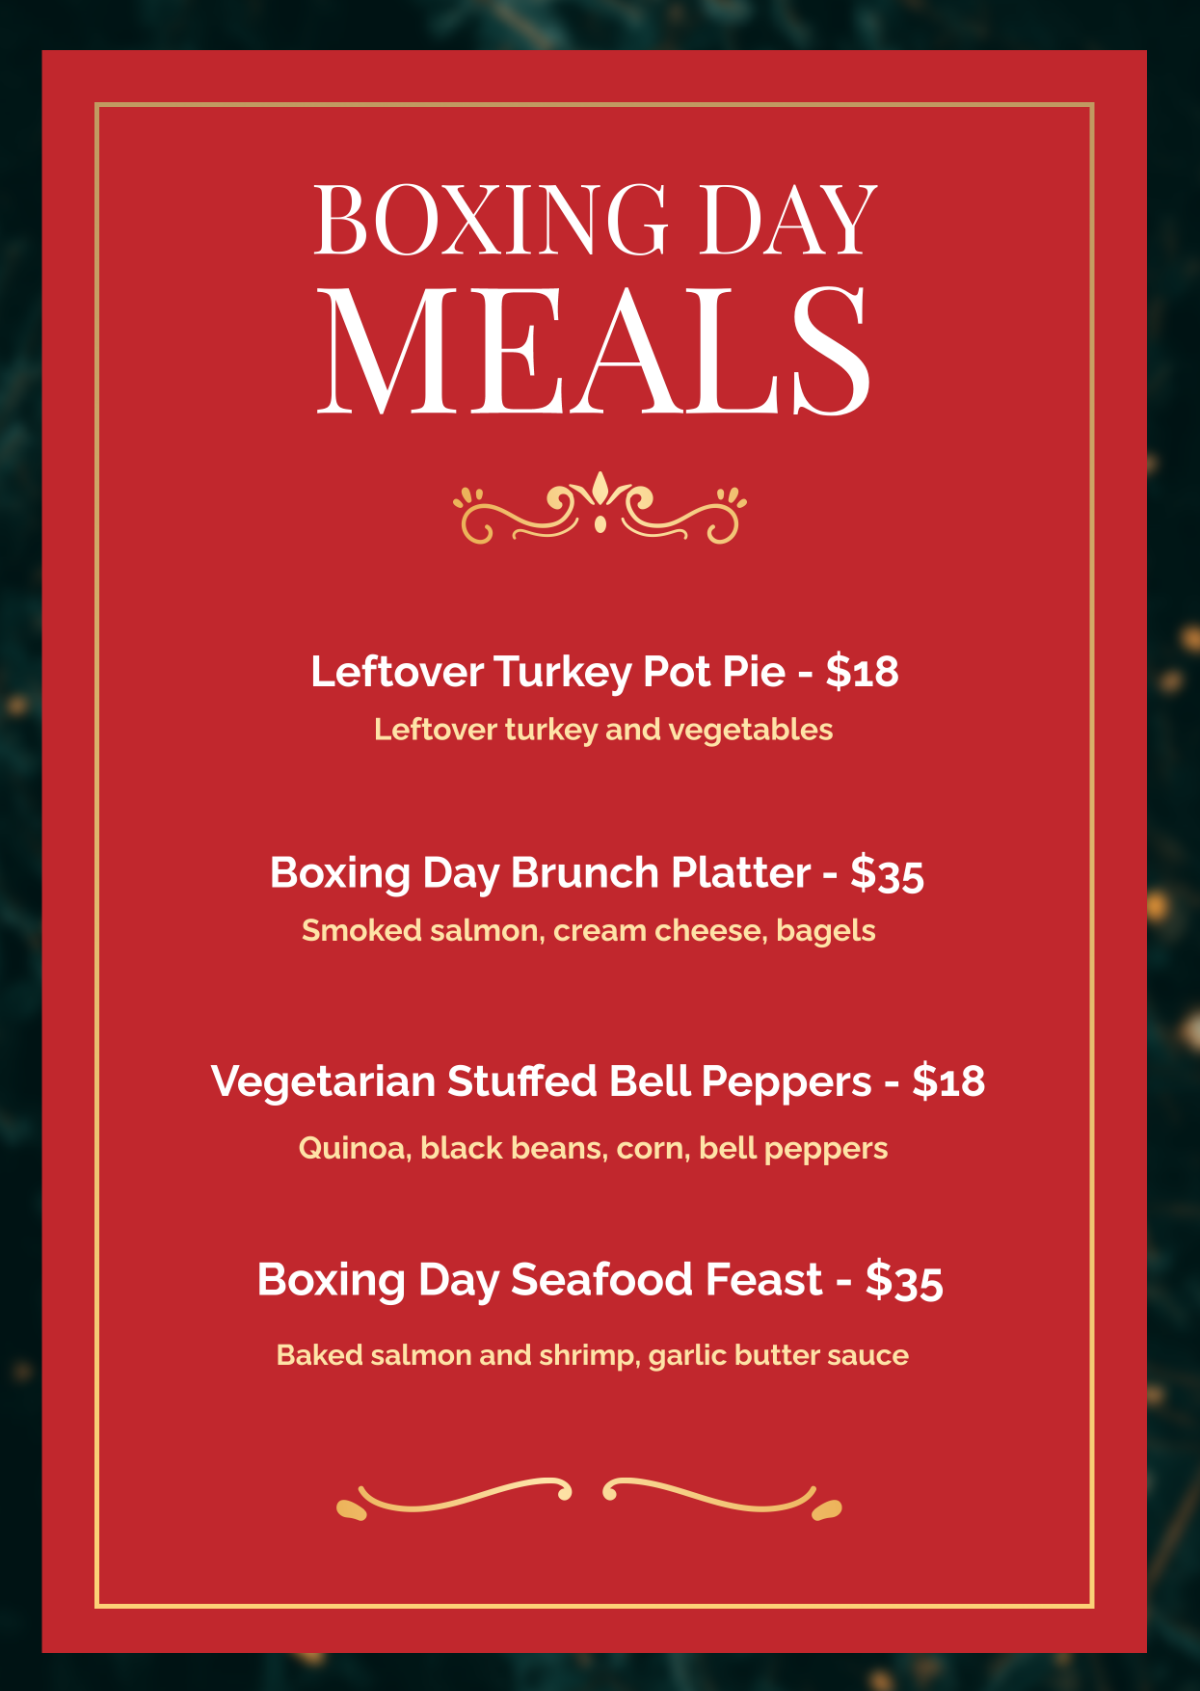 Boxing Day Meals Menu Template